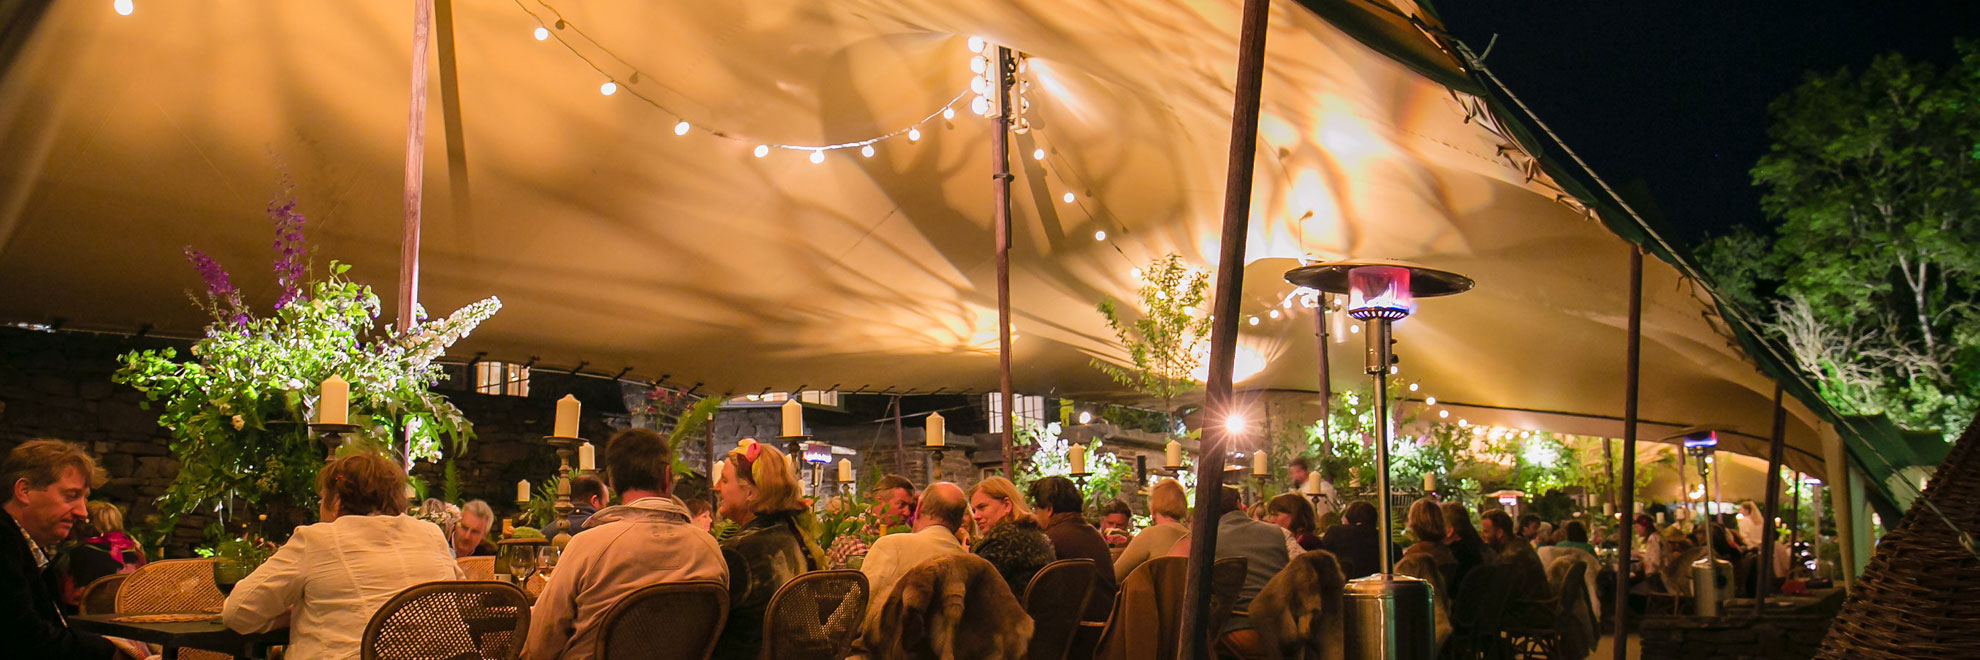 Beige stretch tent, guests, fairy lights, patio heater